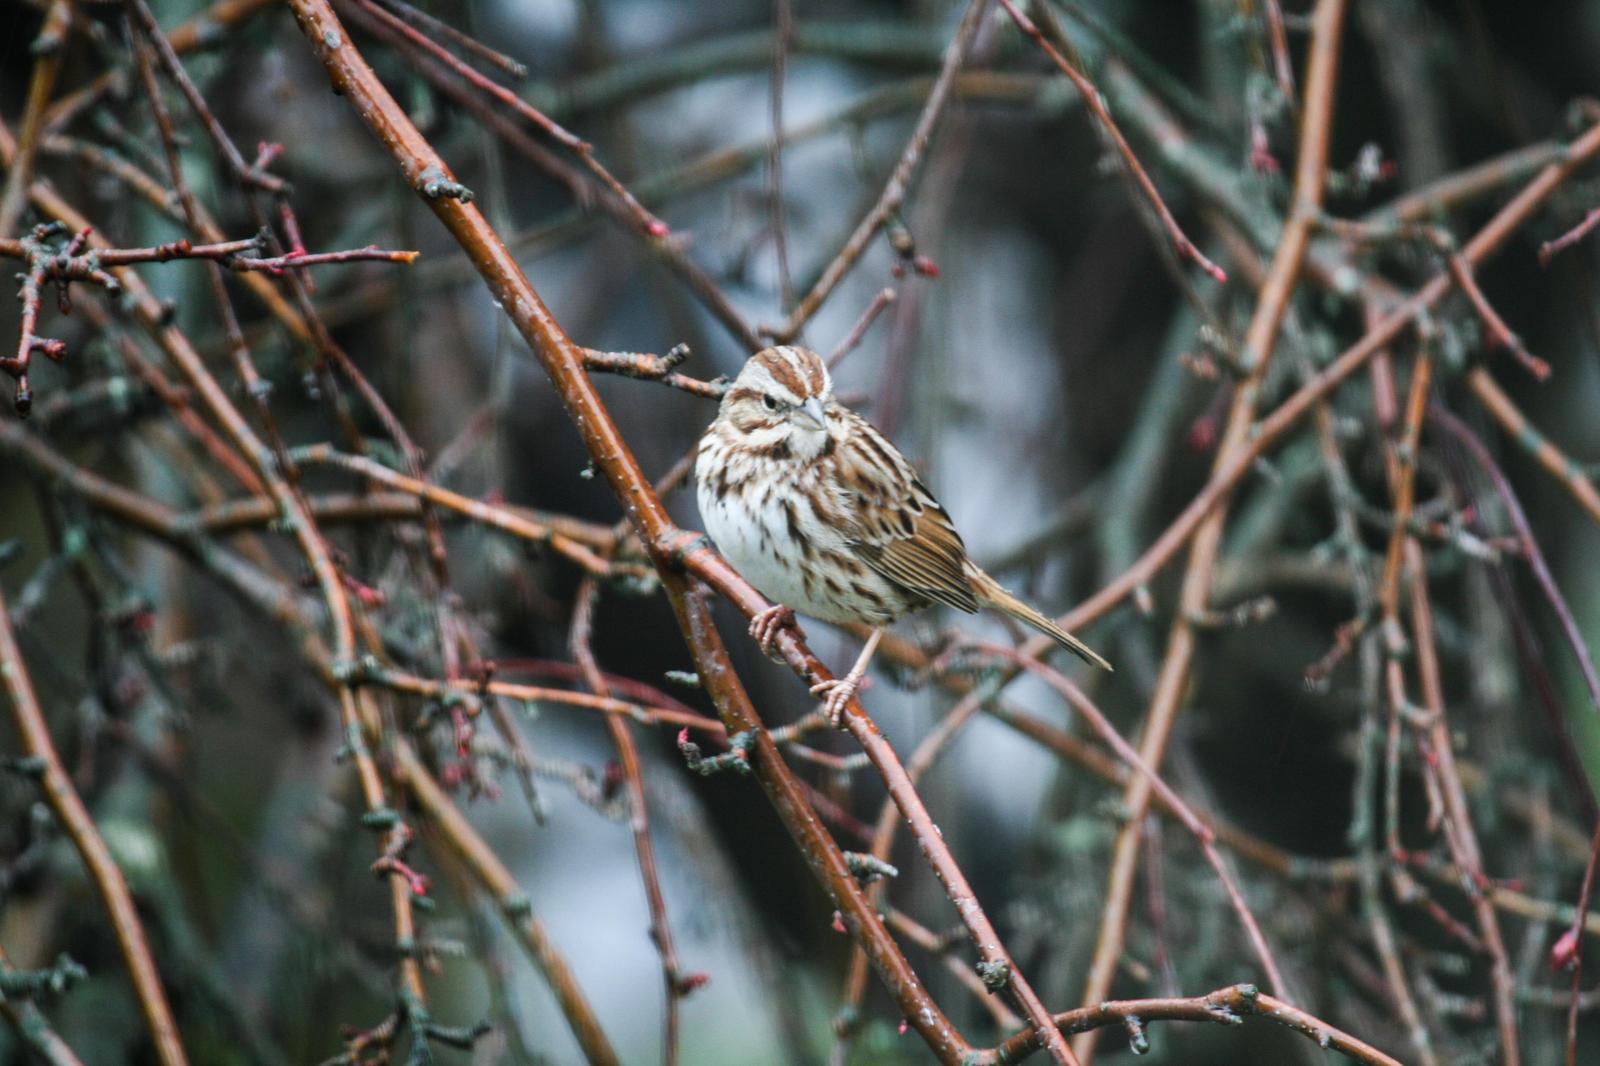 Song Sparrow Photo by Roseanne CALECA